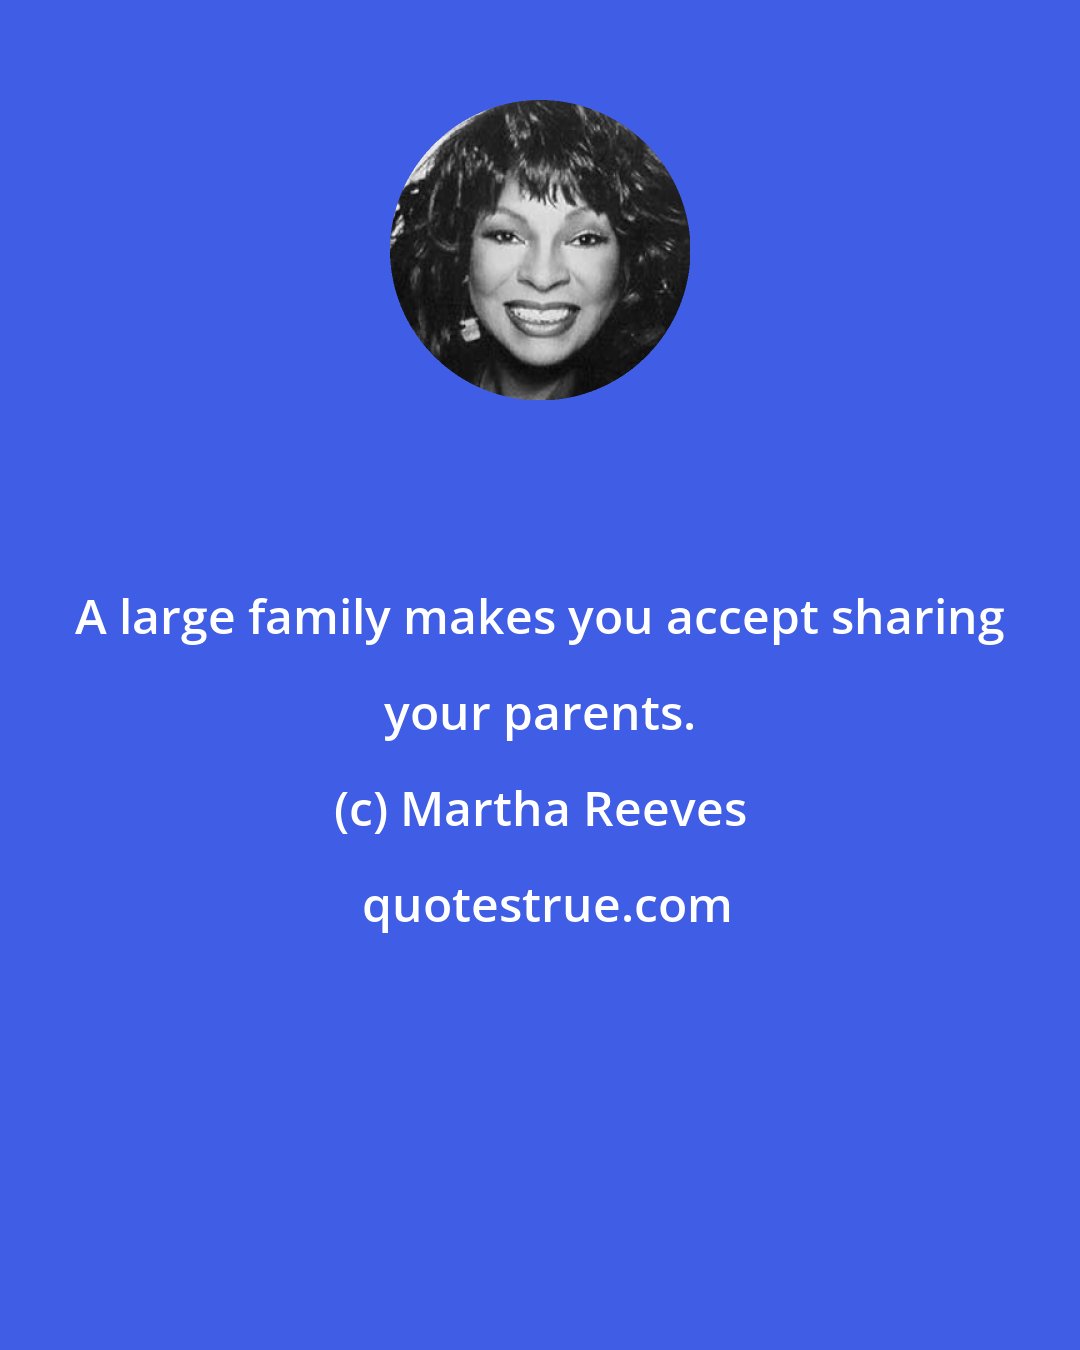 Martha Reeves: A large family makes you accept sharing your parents.